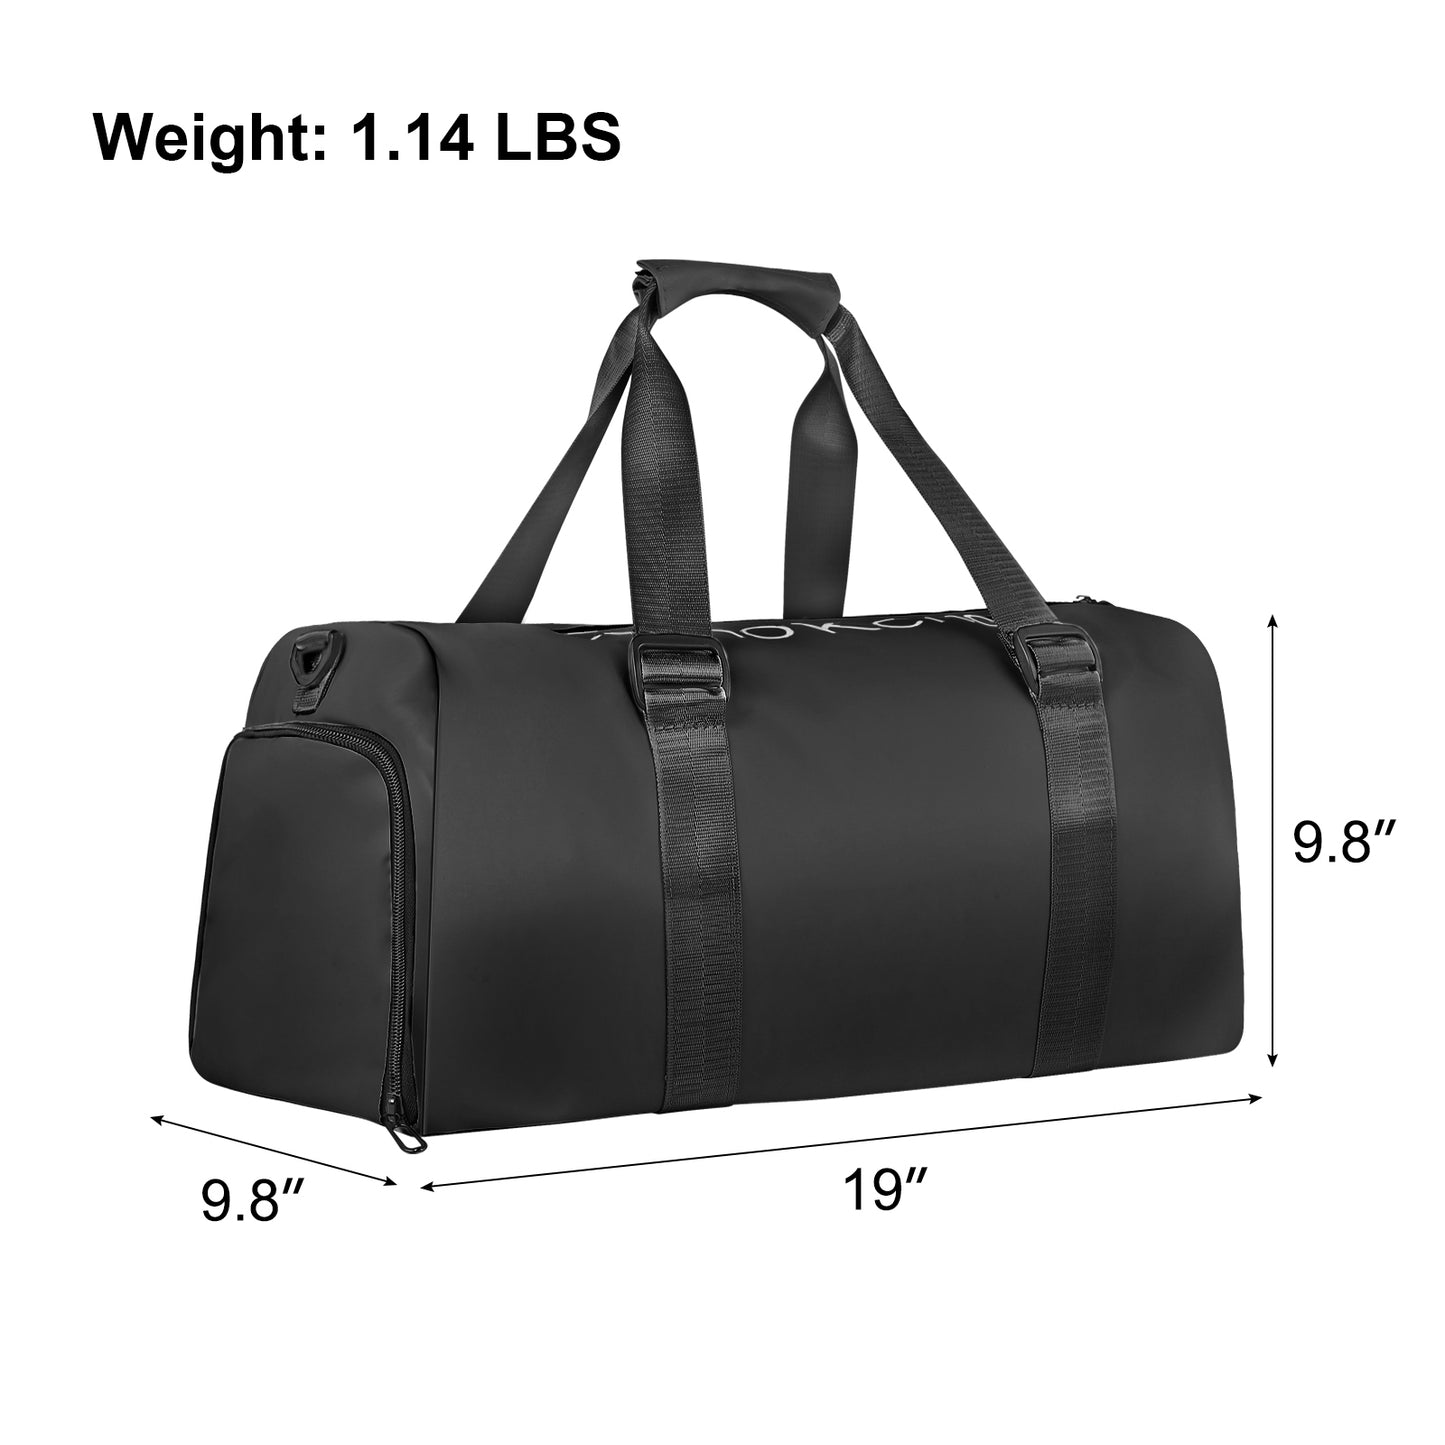 YSSOA Gym Bag for Women and Men, Waterproof Duffel Bag Shoes Compartment, Lightweight Carry, Black, 19 Inch